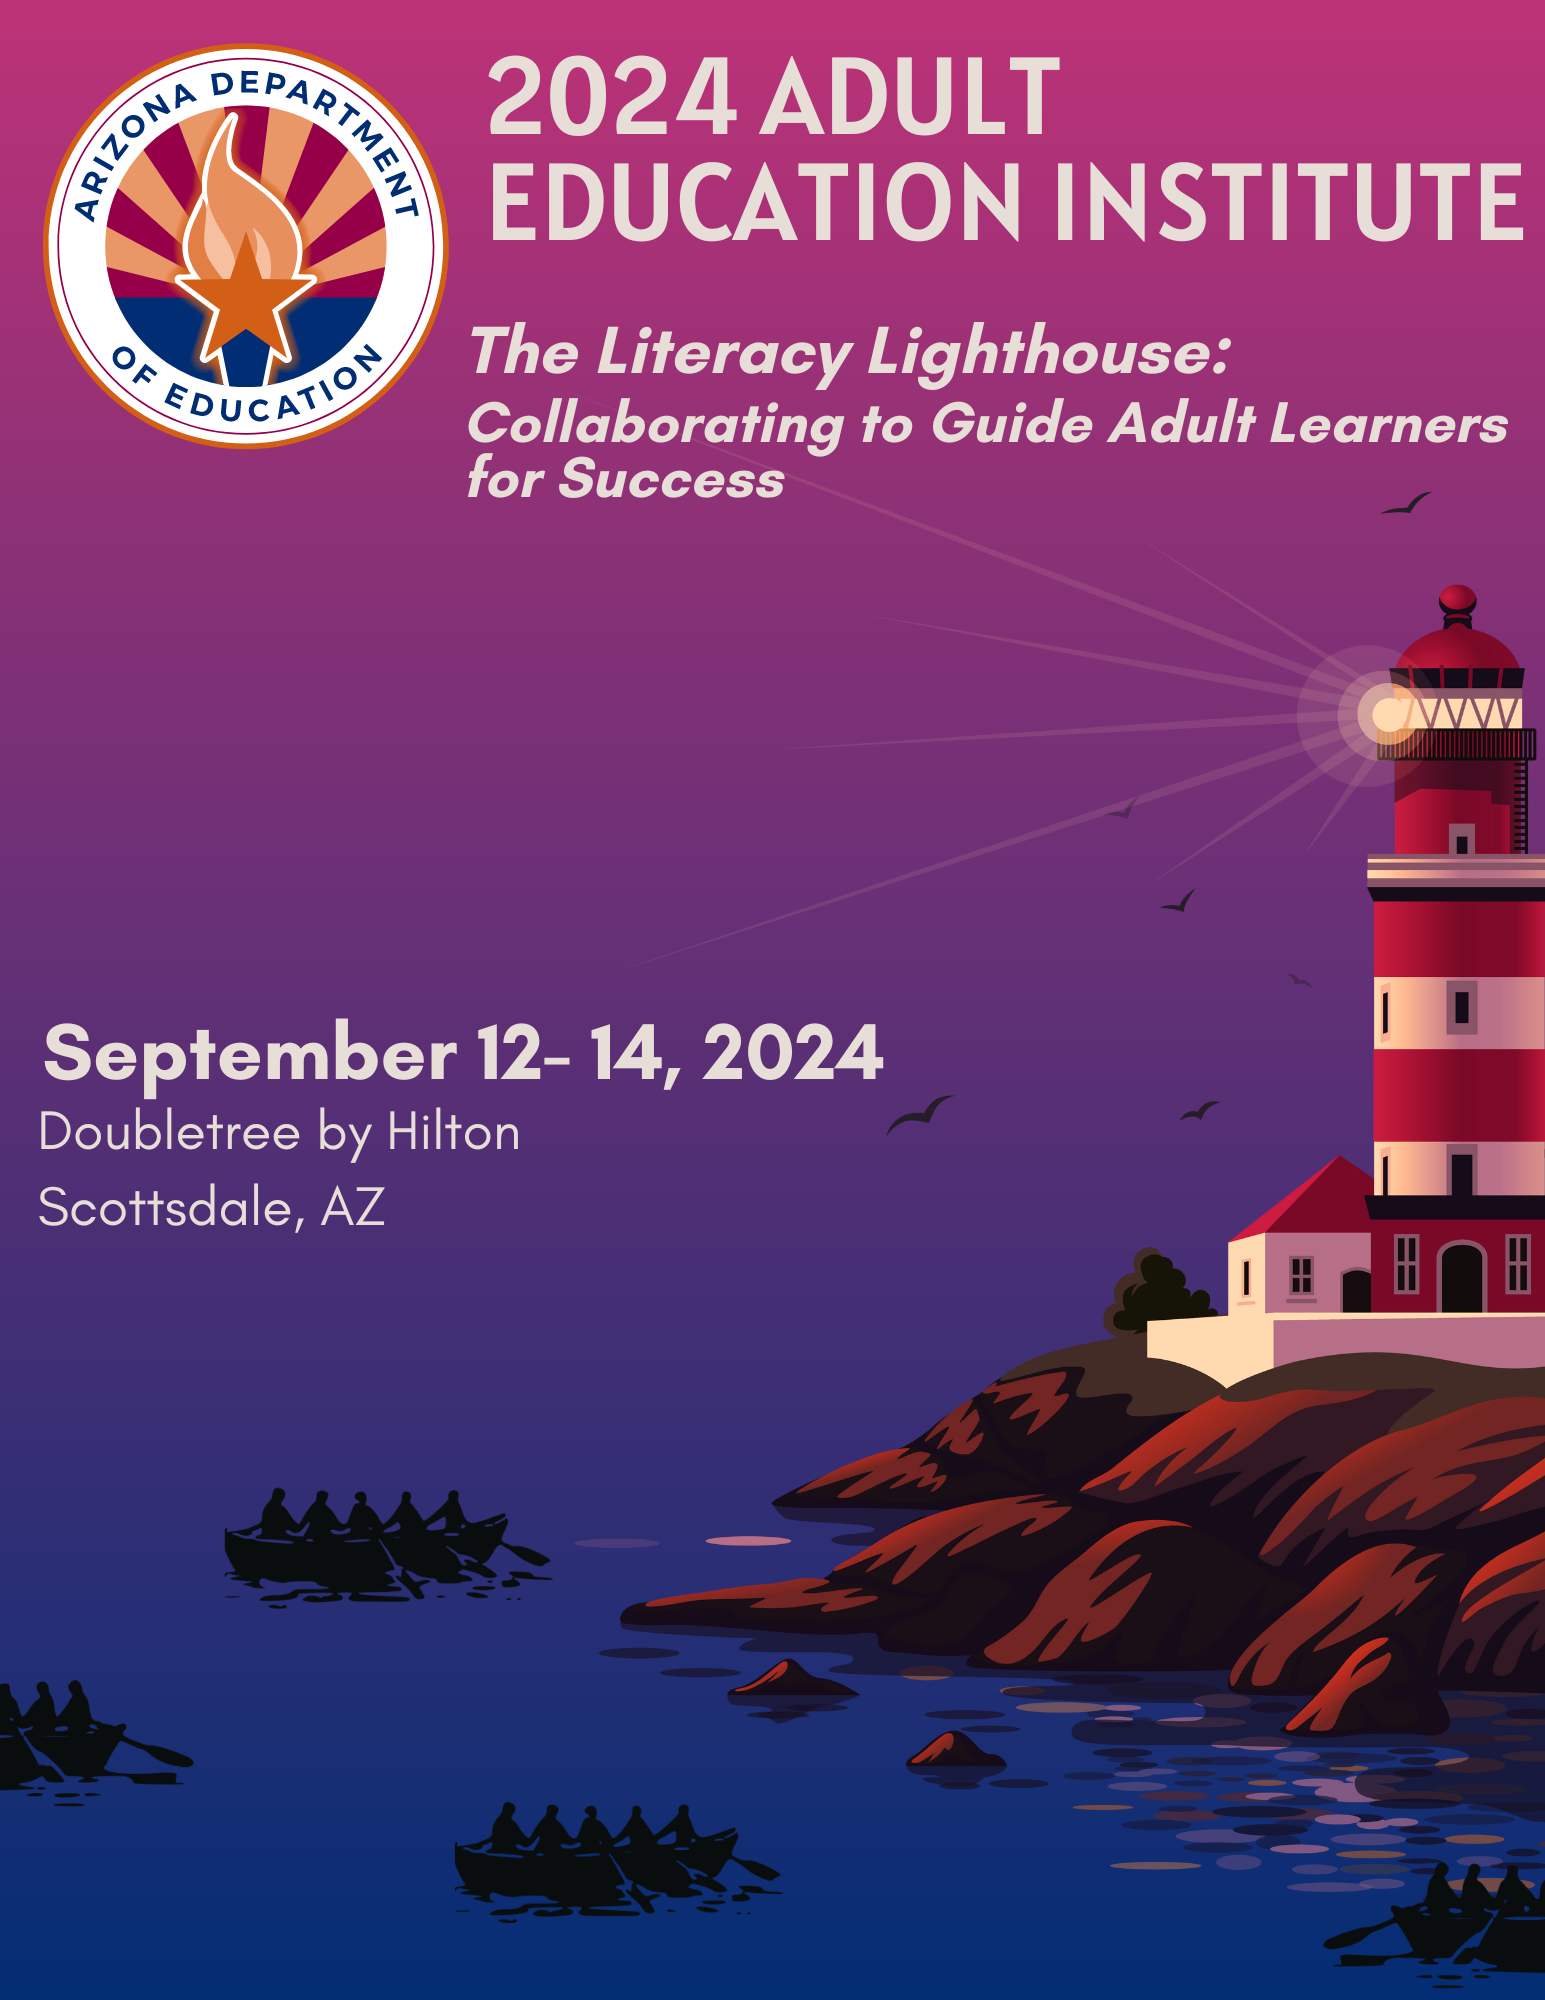 2024 Arizona Adult Education Institute at Doubletree by Hilton in Scottsdale, Arizona from September 12 - 14. This year's theme is 'The Literacy Lighthouse: Collaborating to Guide Adult Learners'